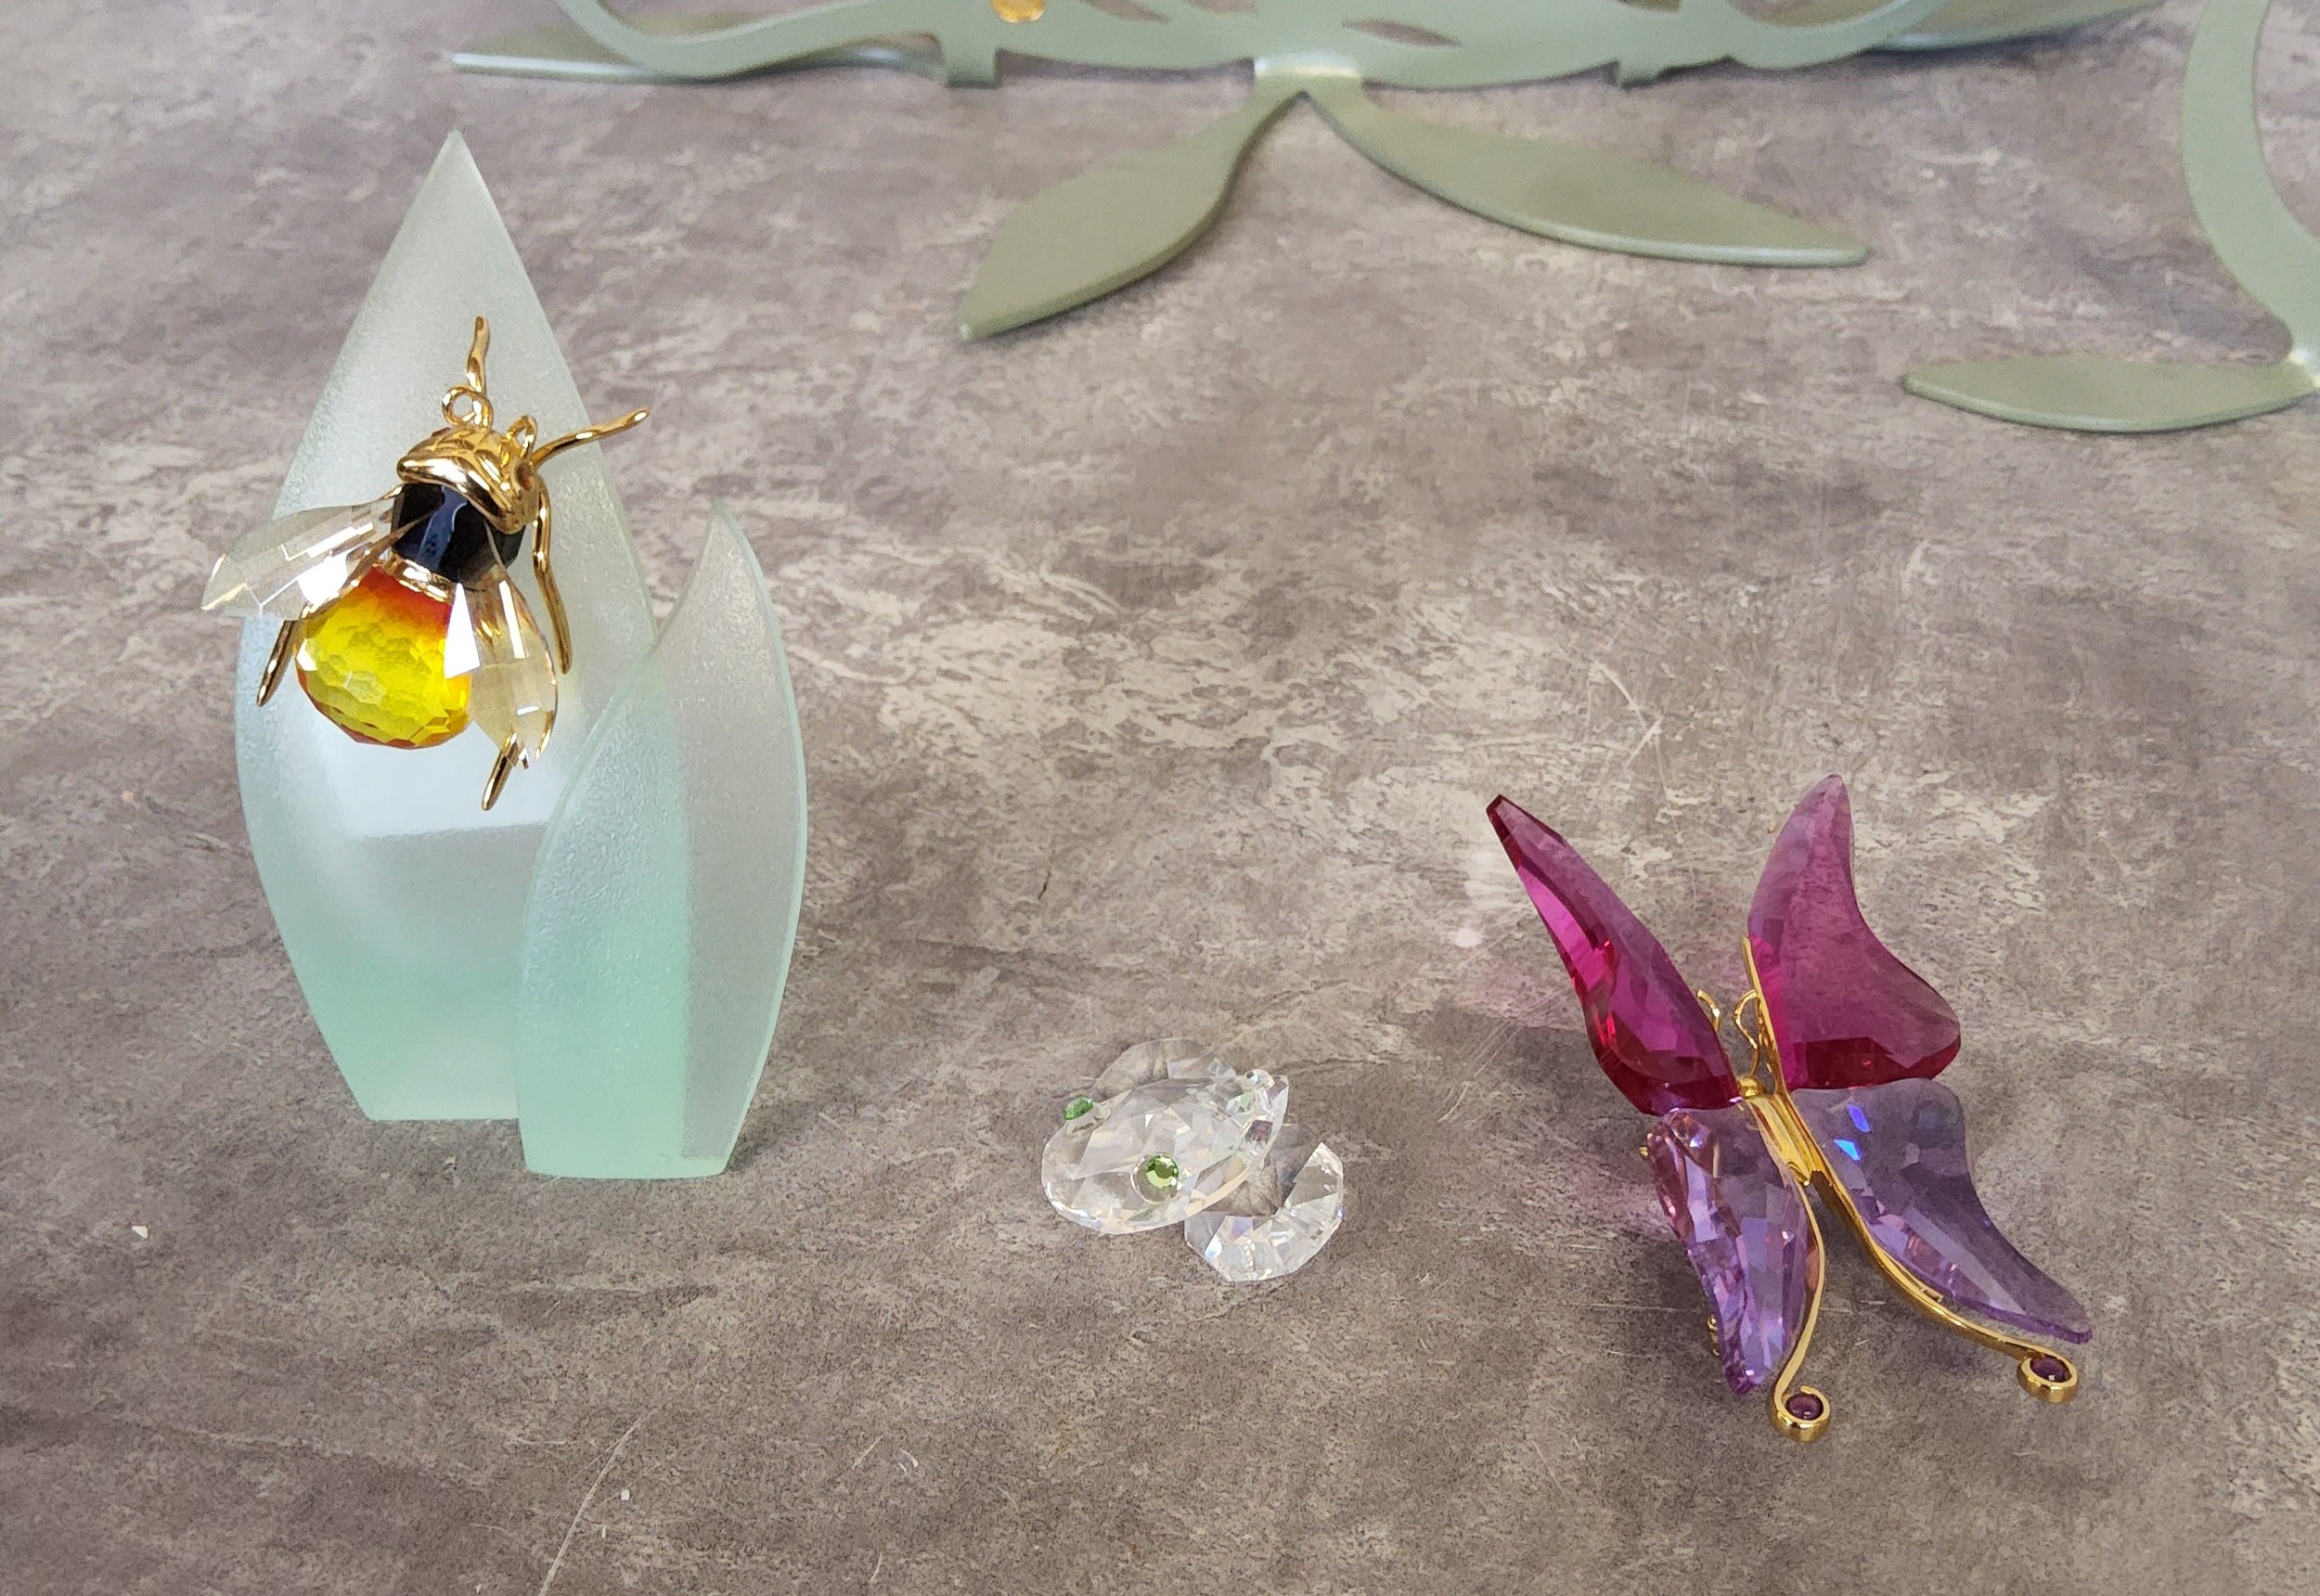 Daniel Swarovski Paradise collection including gold plated sterling silver crickets, dragonflies, - Image 5 of 6